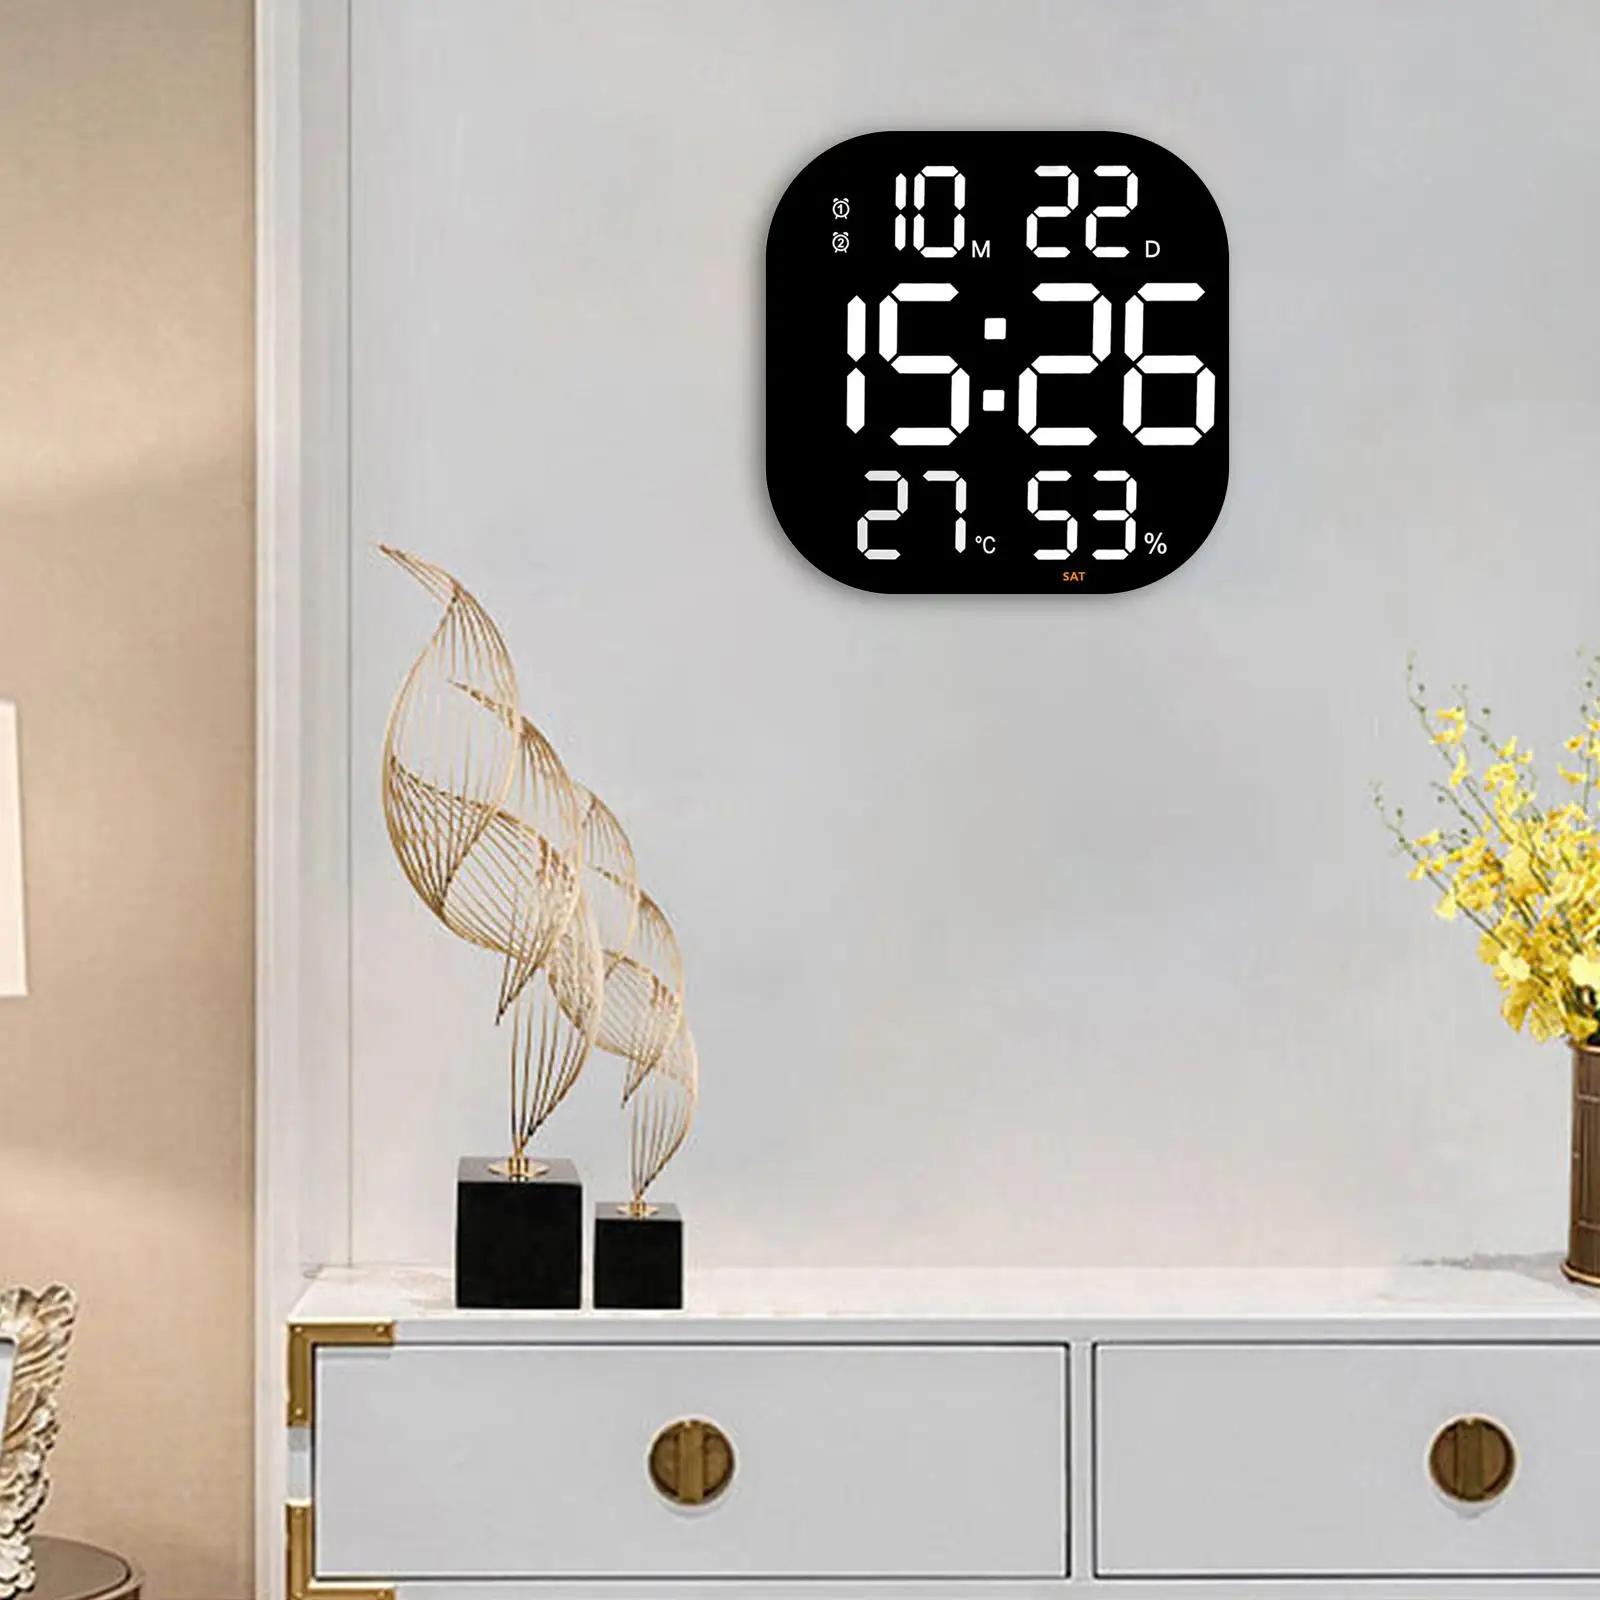 LED Digital Wall Clock Large Screen Temperature Month Date Display Electronic Alarm Clock with Remote Control Living Room Decor